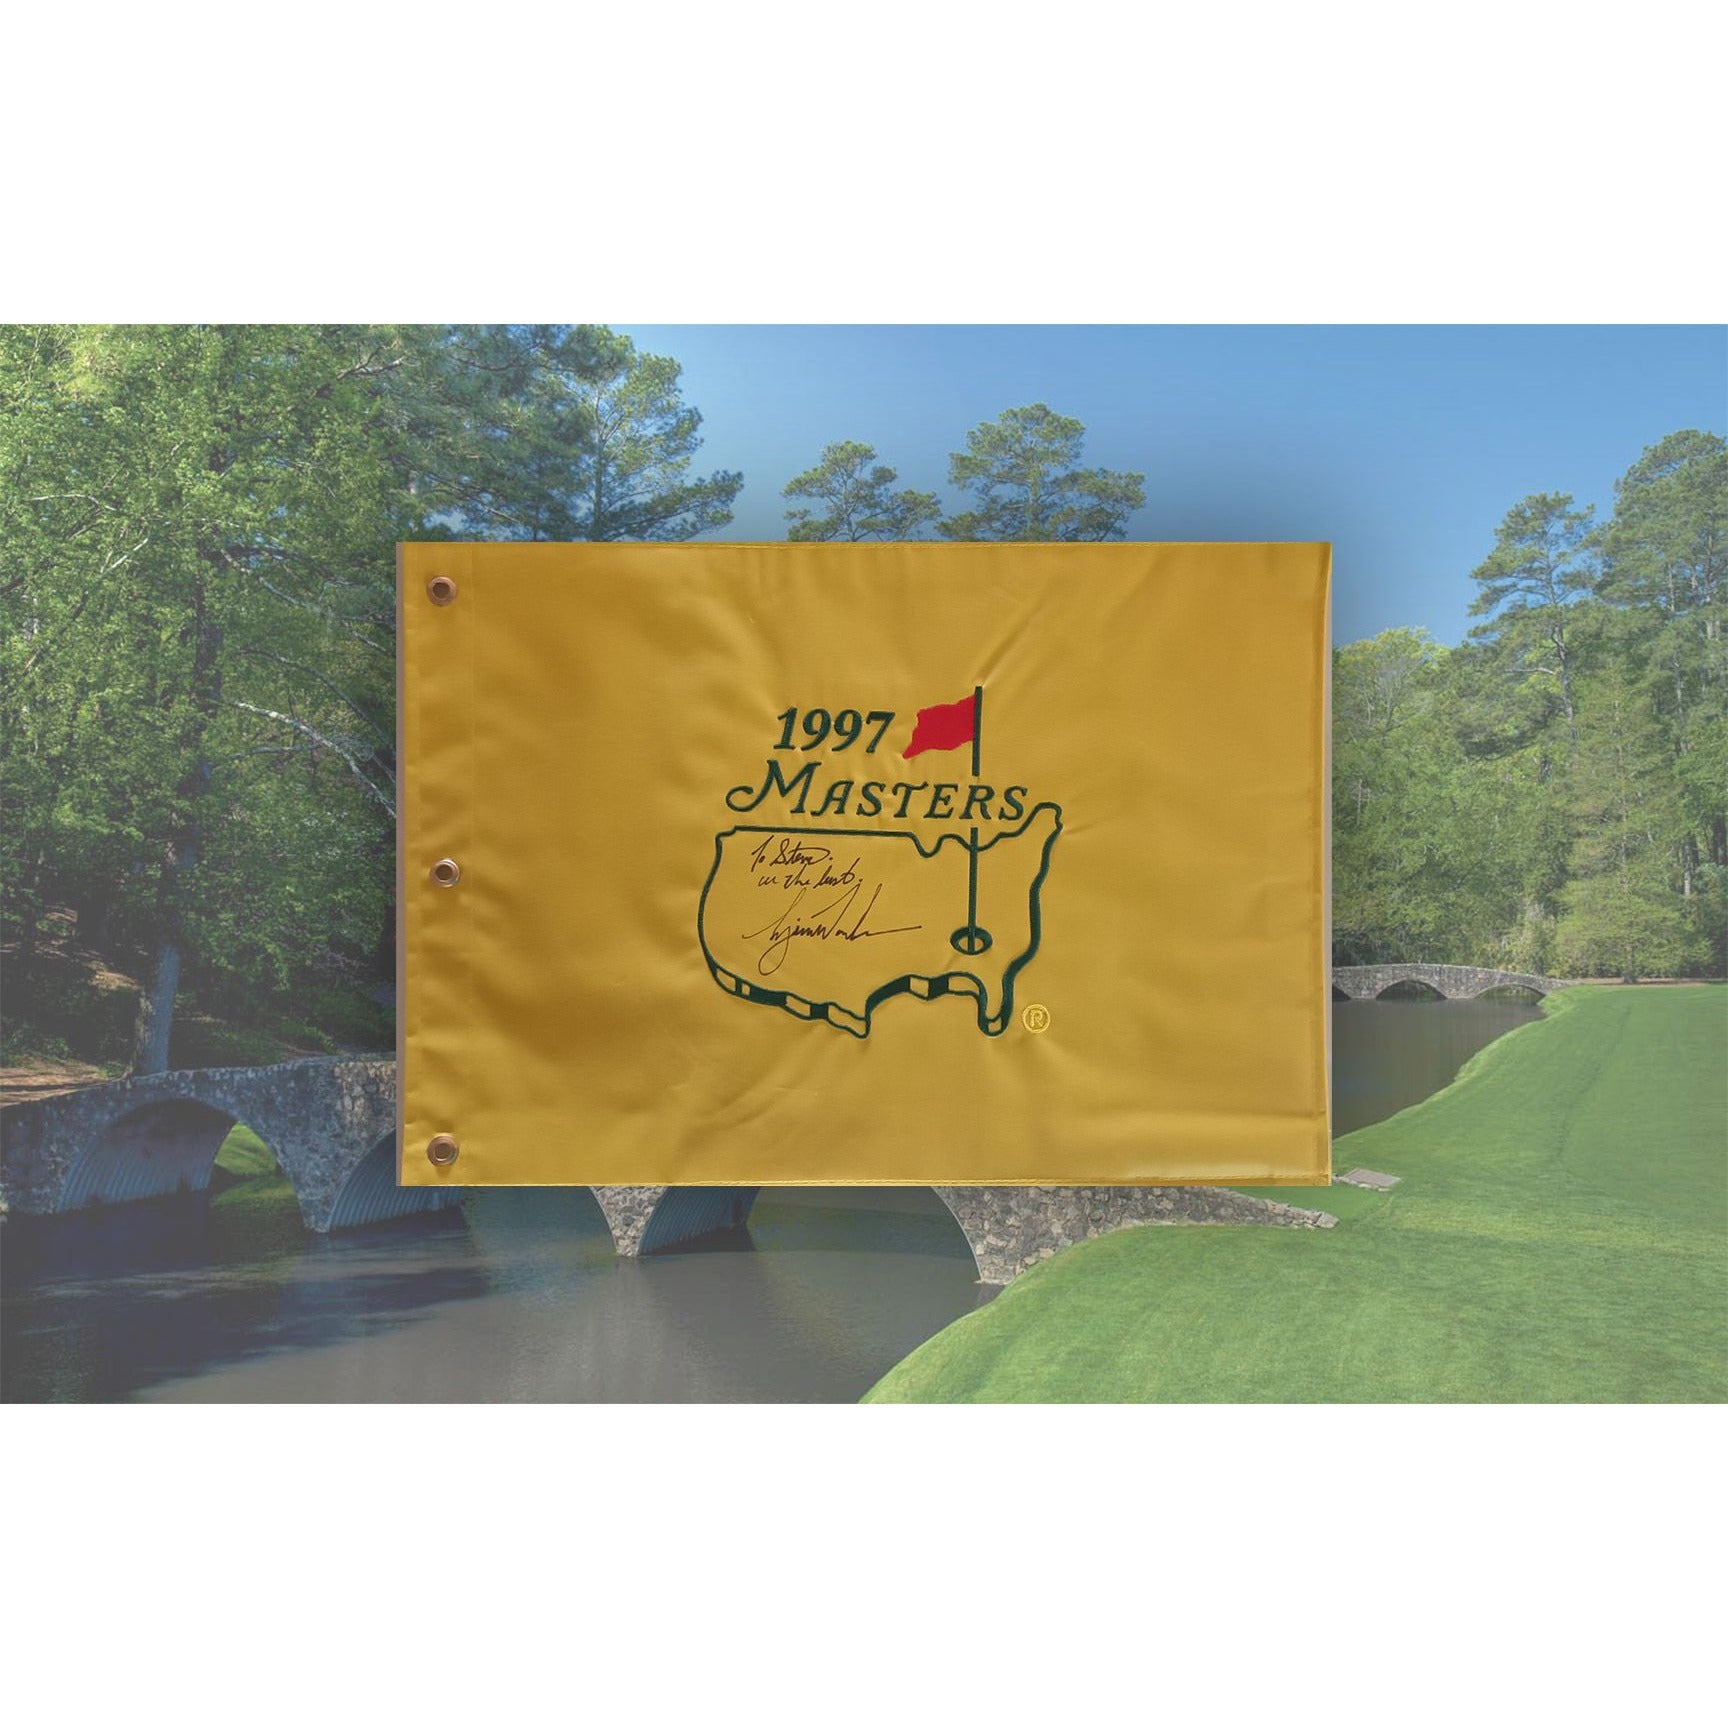 Tiger Woods "To Steve all the best" 1997 Masters Golf pin flag signed with proof